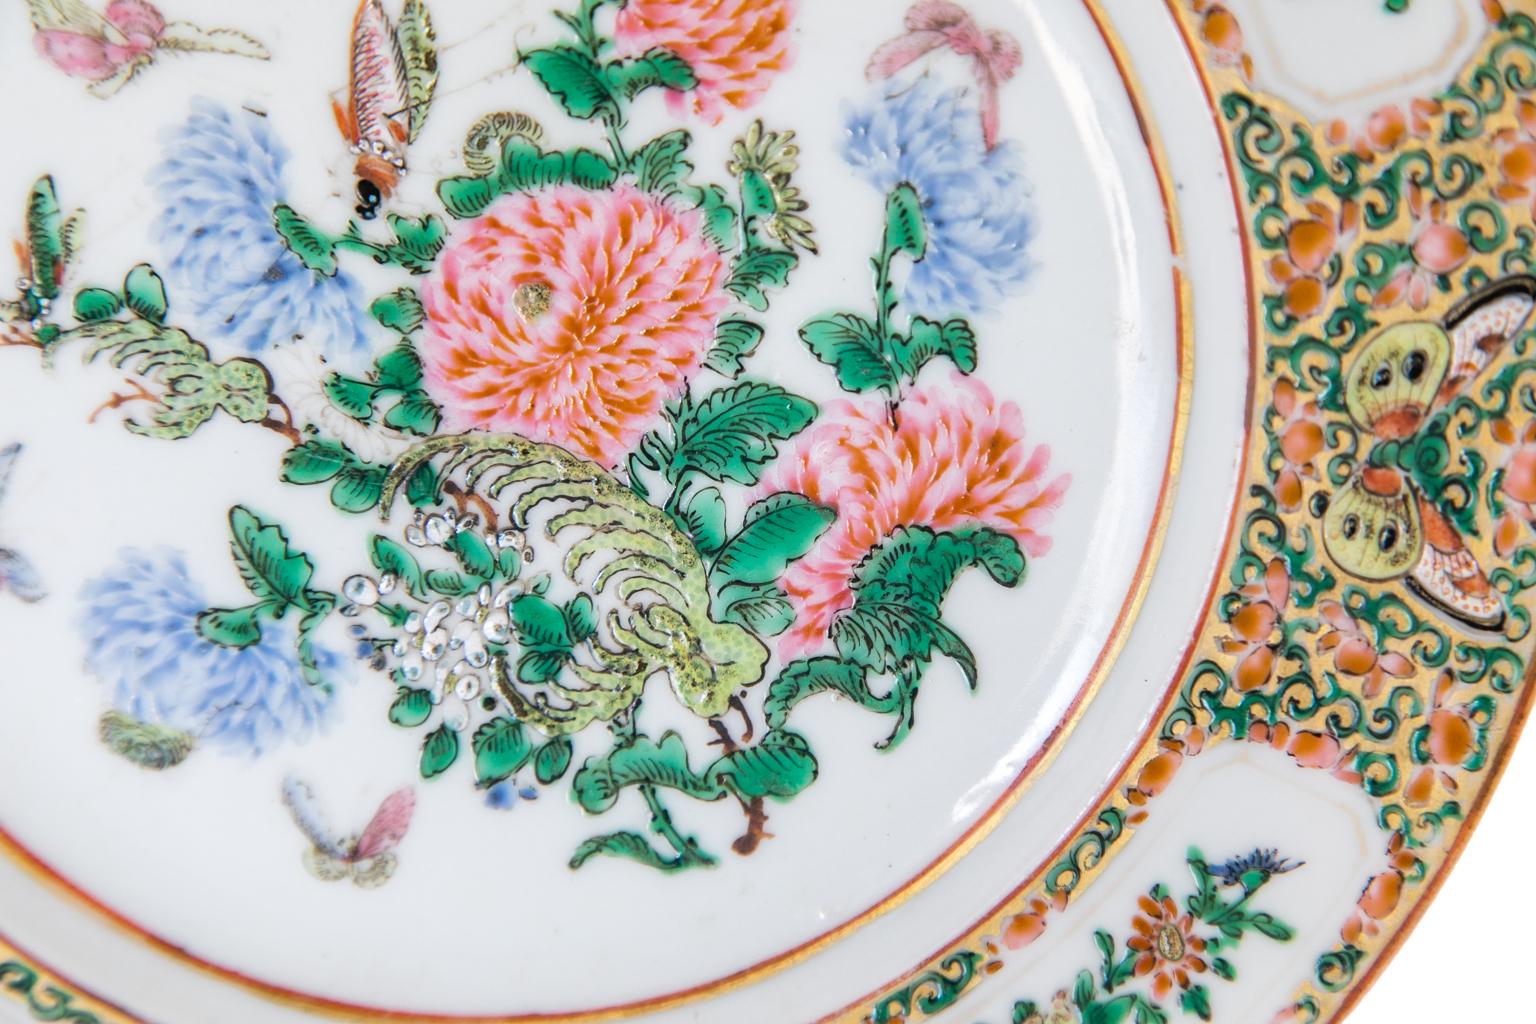 Chinese Export plate, with the center panel of the plate painted with pink and blue chrysanthemums, butterflies, and a grasshopper. The border has four panels depicting fruit and flowers as well as a brocaded floral pattern with butterflies on a